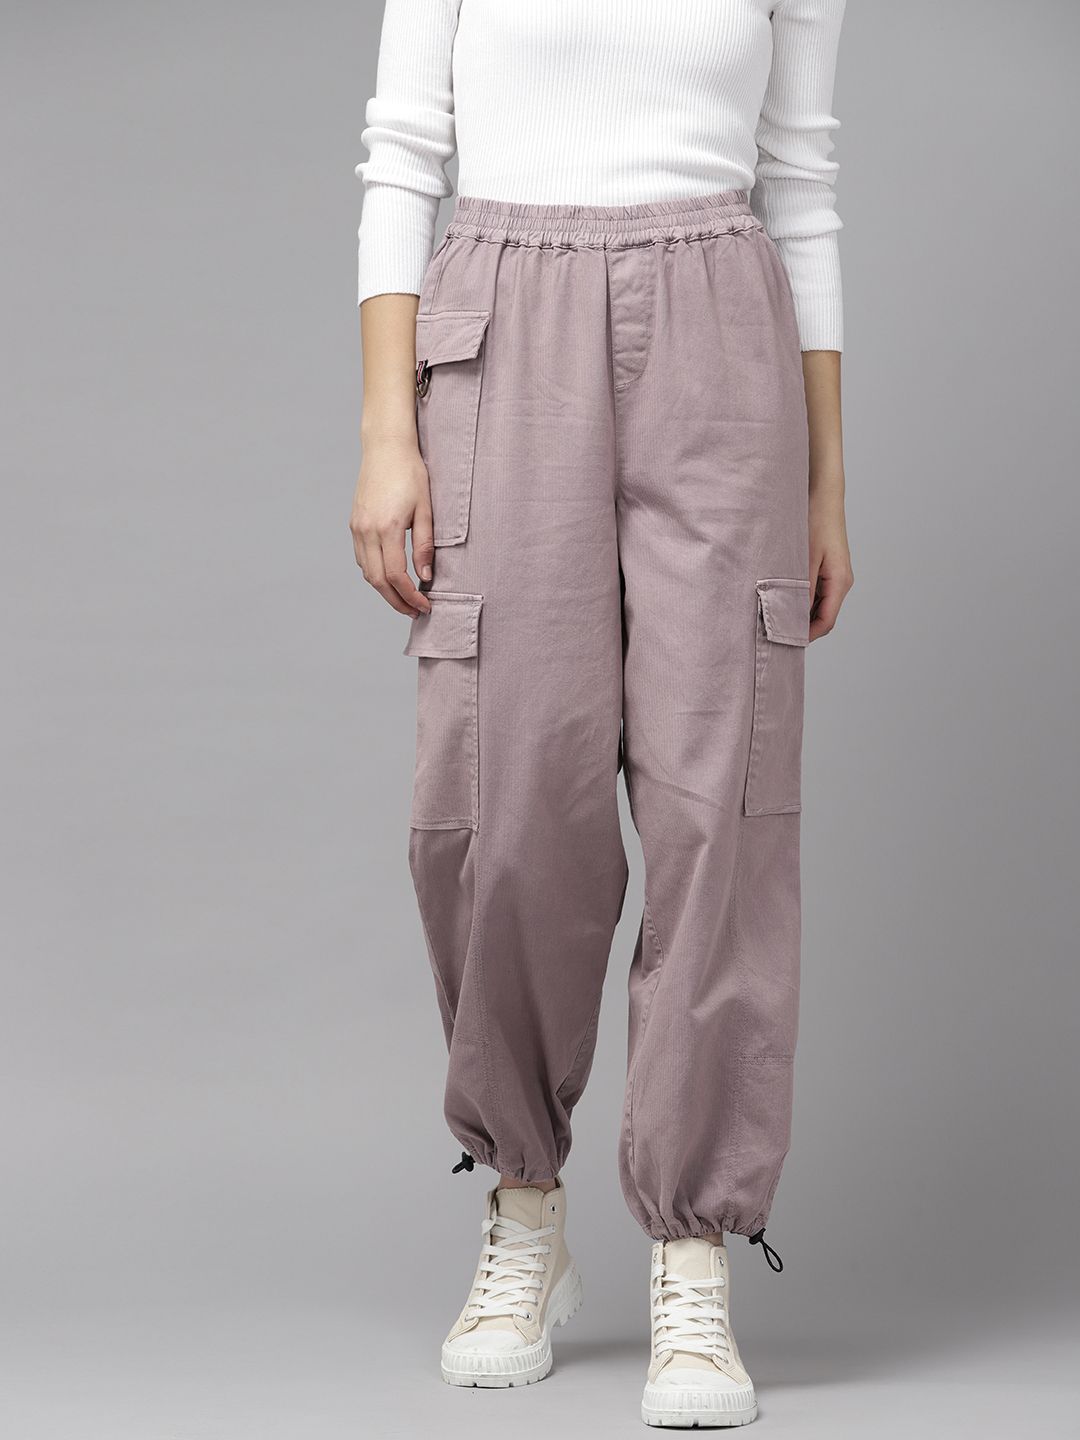 The Roadster Lifestyle Co. Women Cargos Trousers Price in India